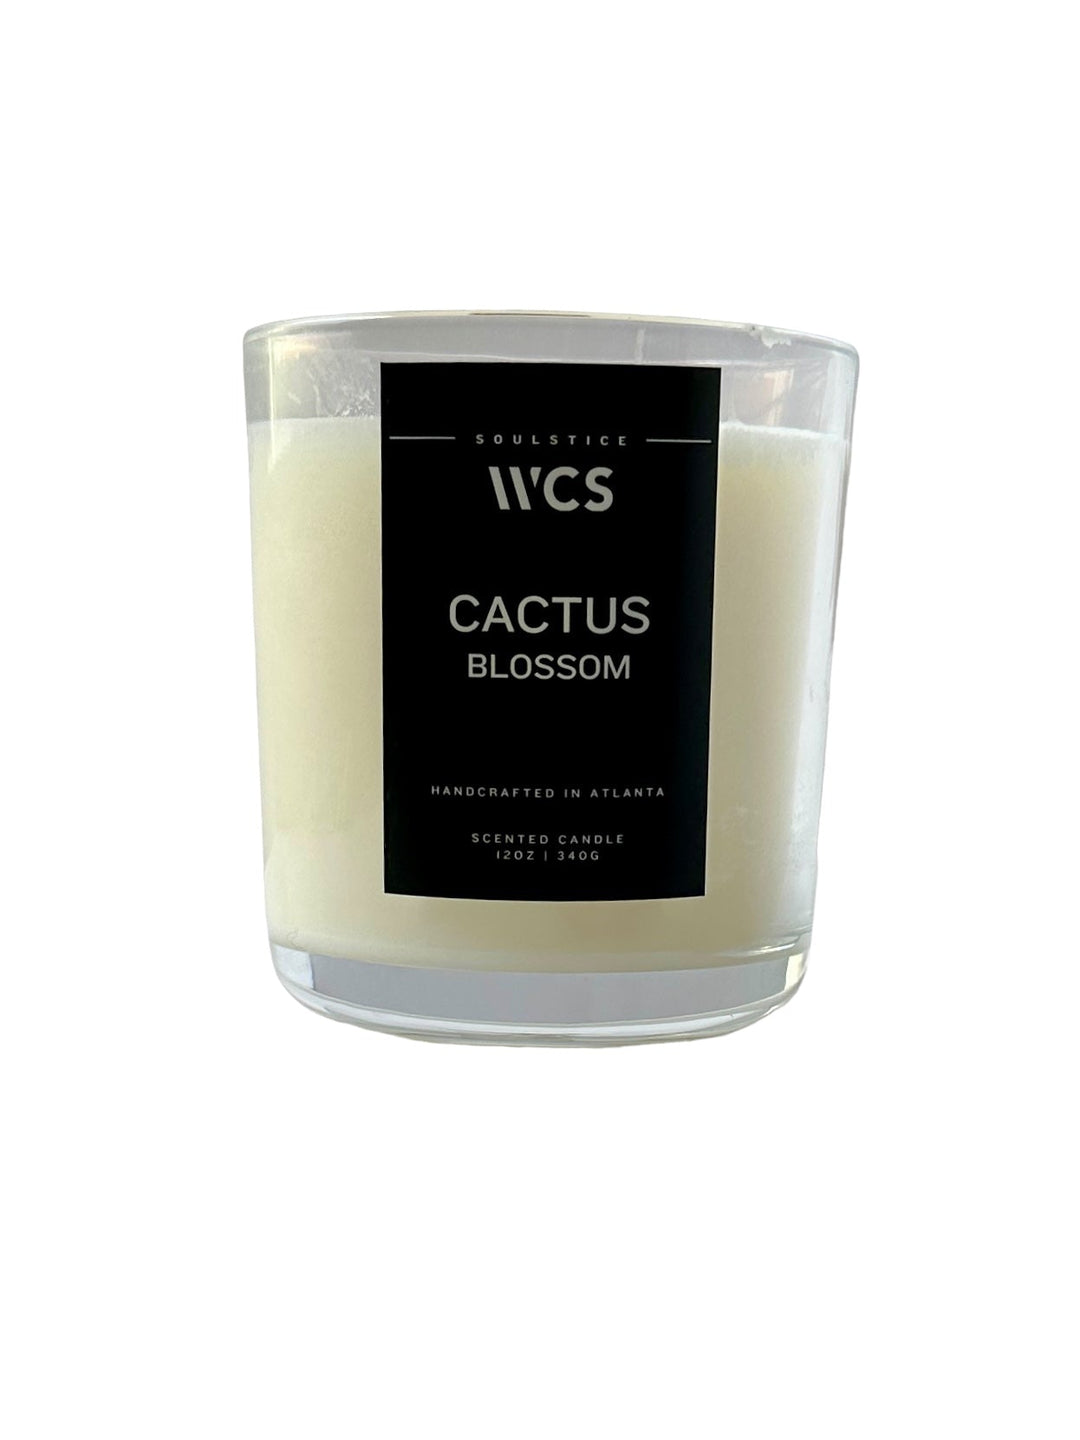 Cactus Blossom Scented Candle (12 oz.) - The Village Retail